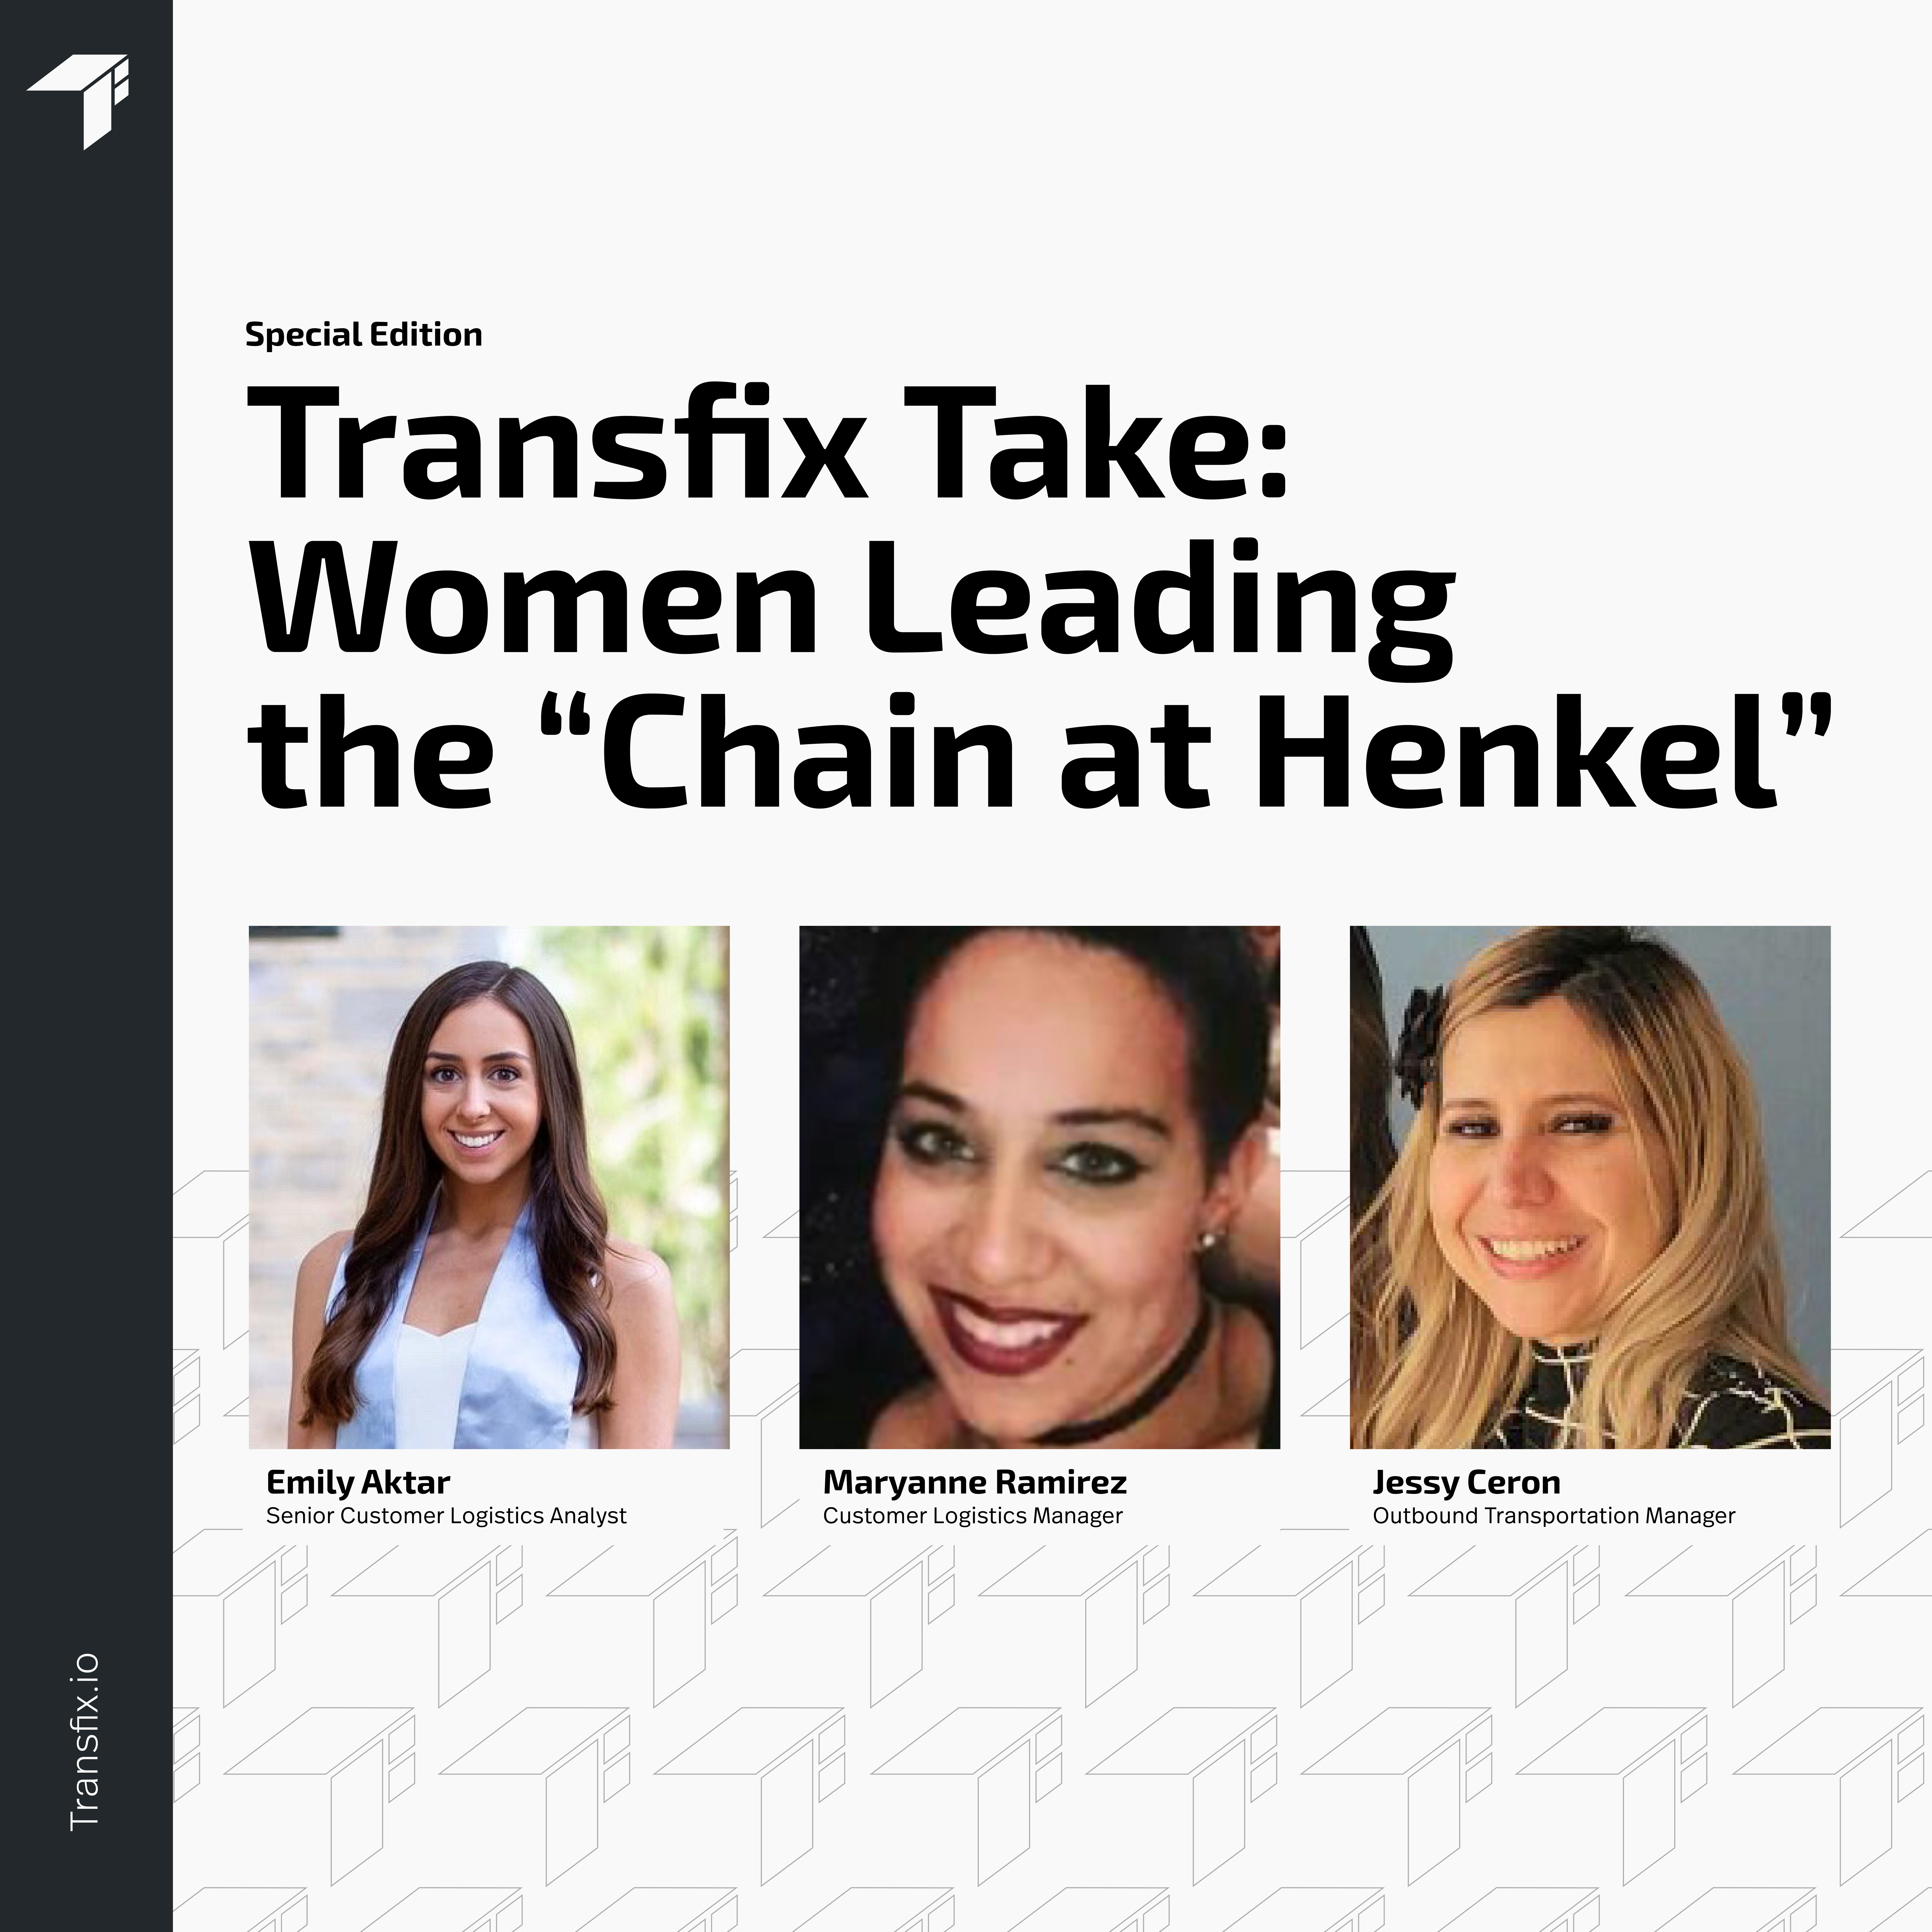 Transfix Take Podcast Women Leading the 'Chain at Henkel'